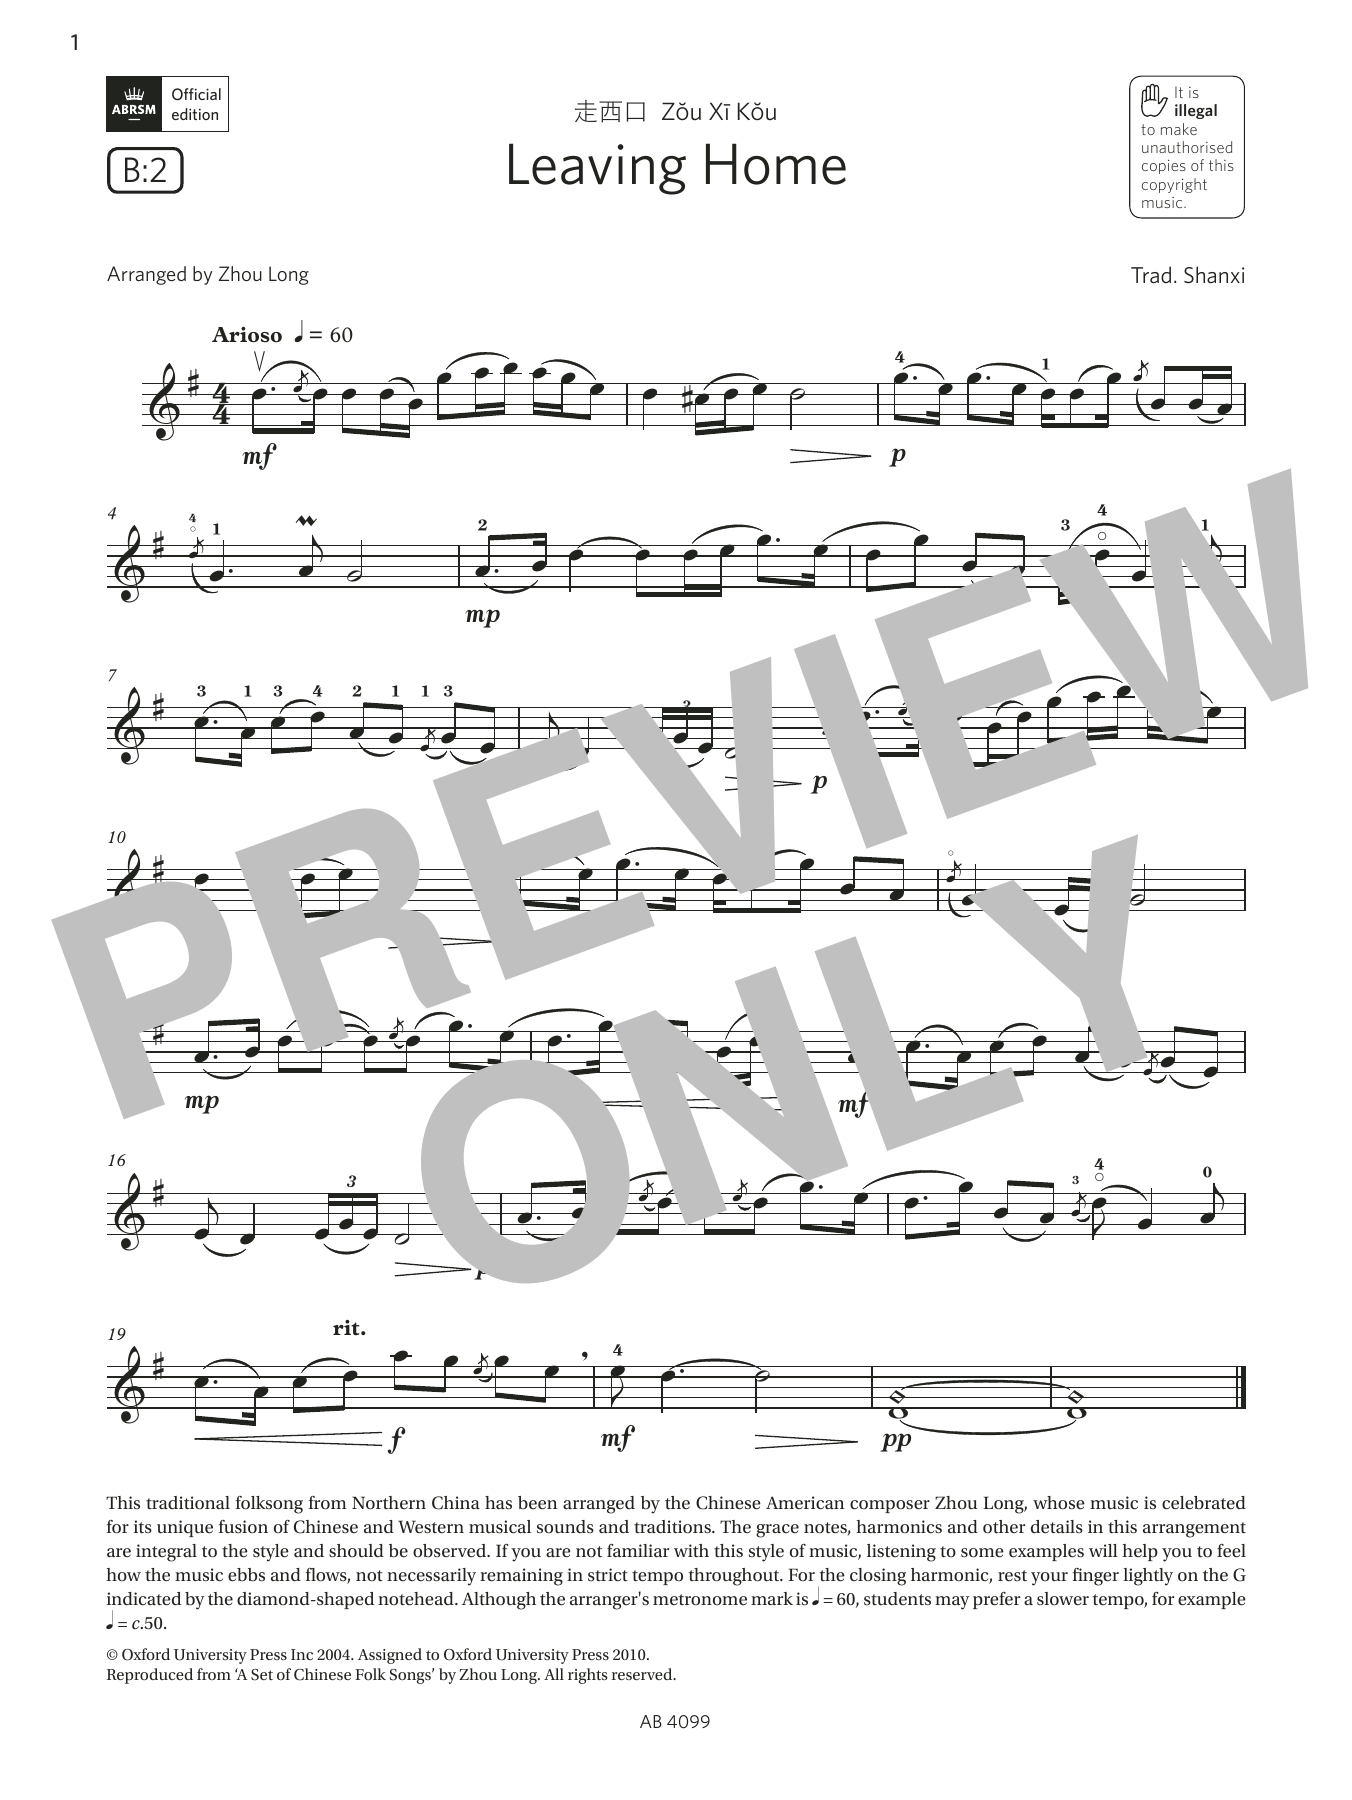 Download Trad. Shanxi Leaving Home (Grade 5, B2, from the ABR Sheet Music